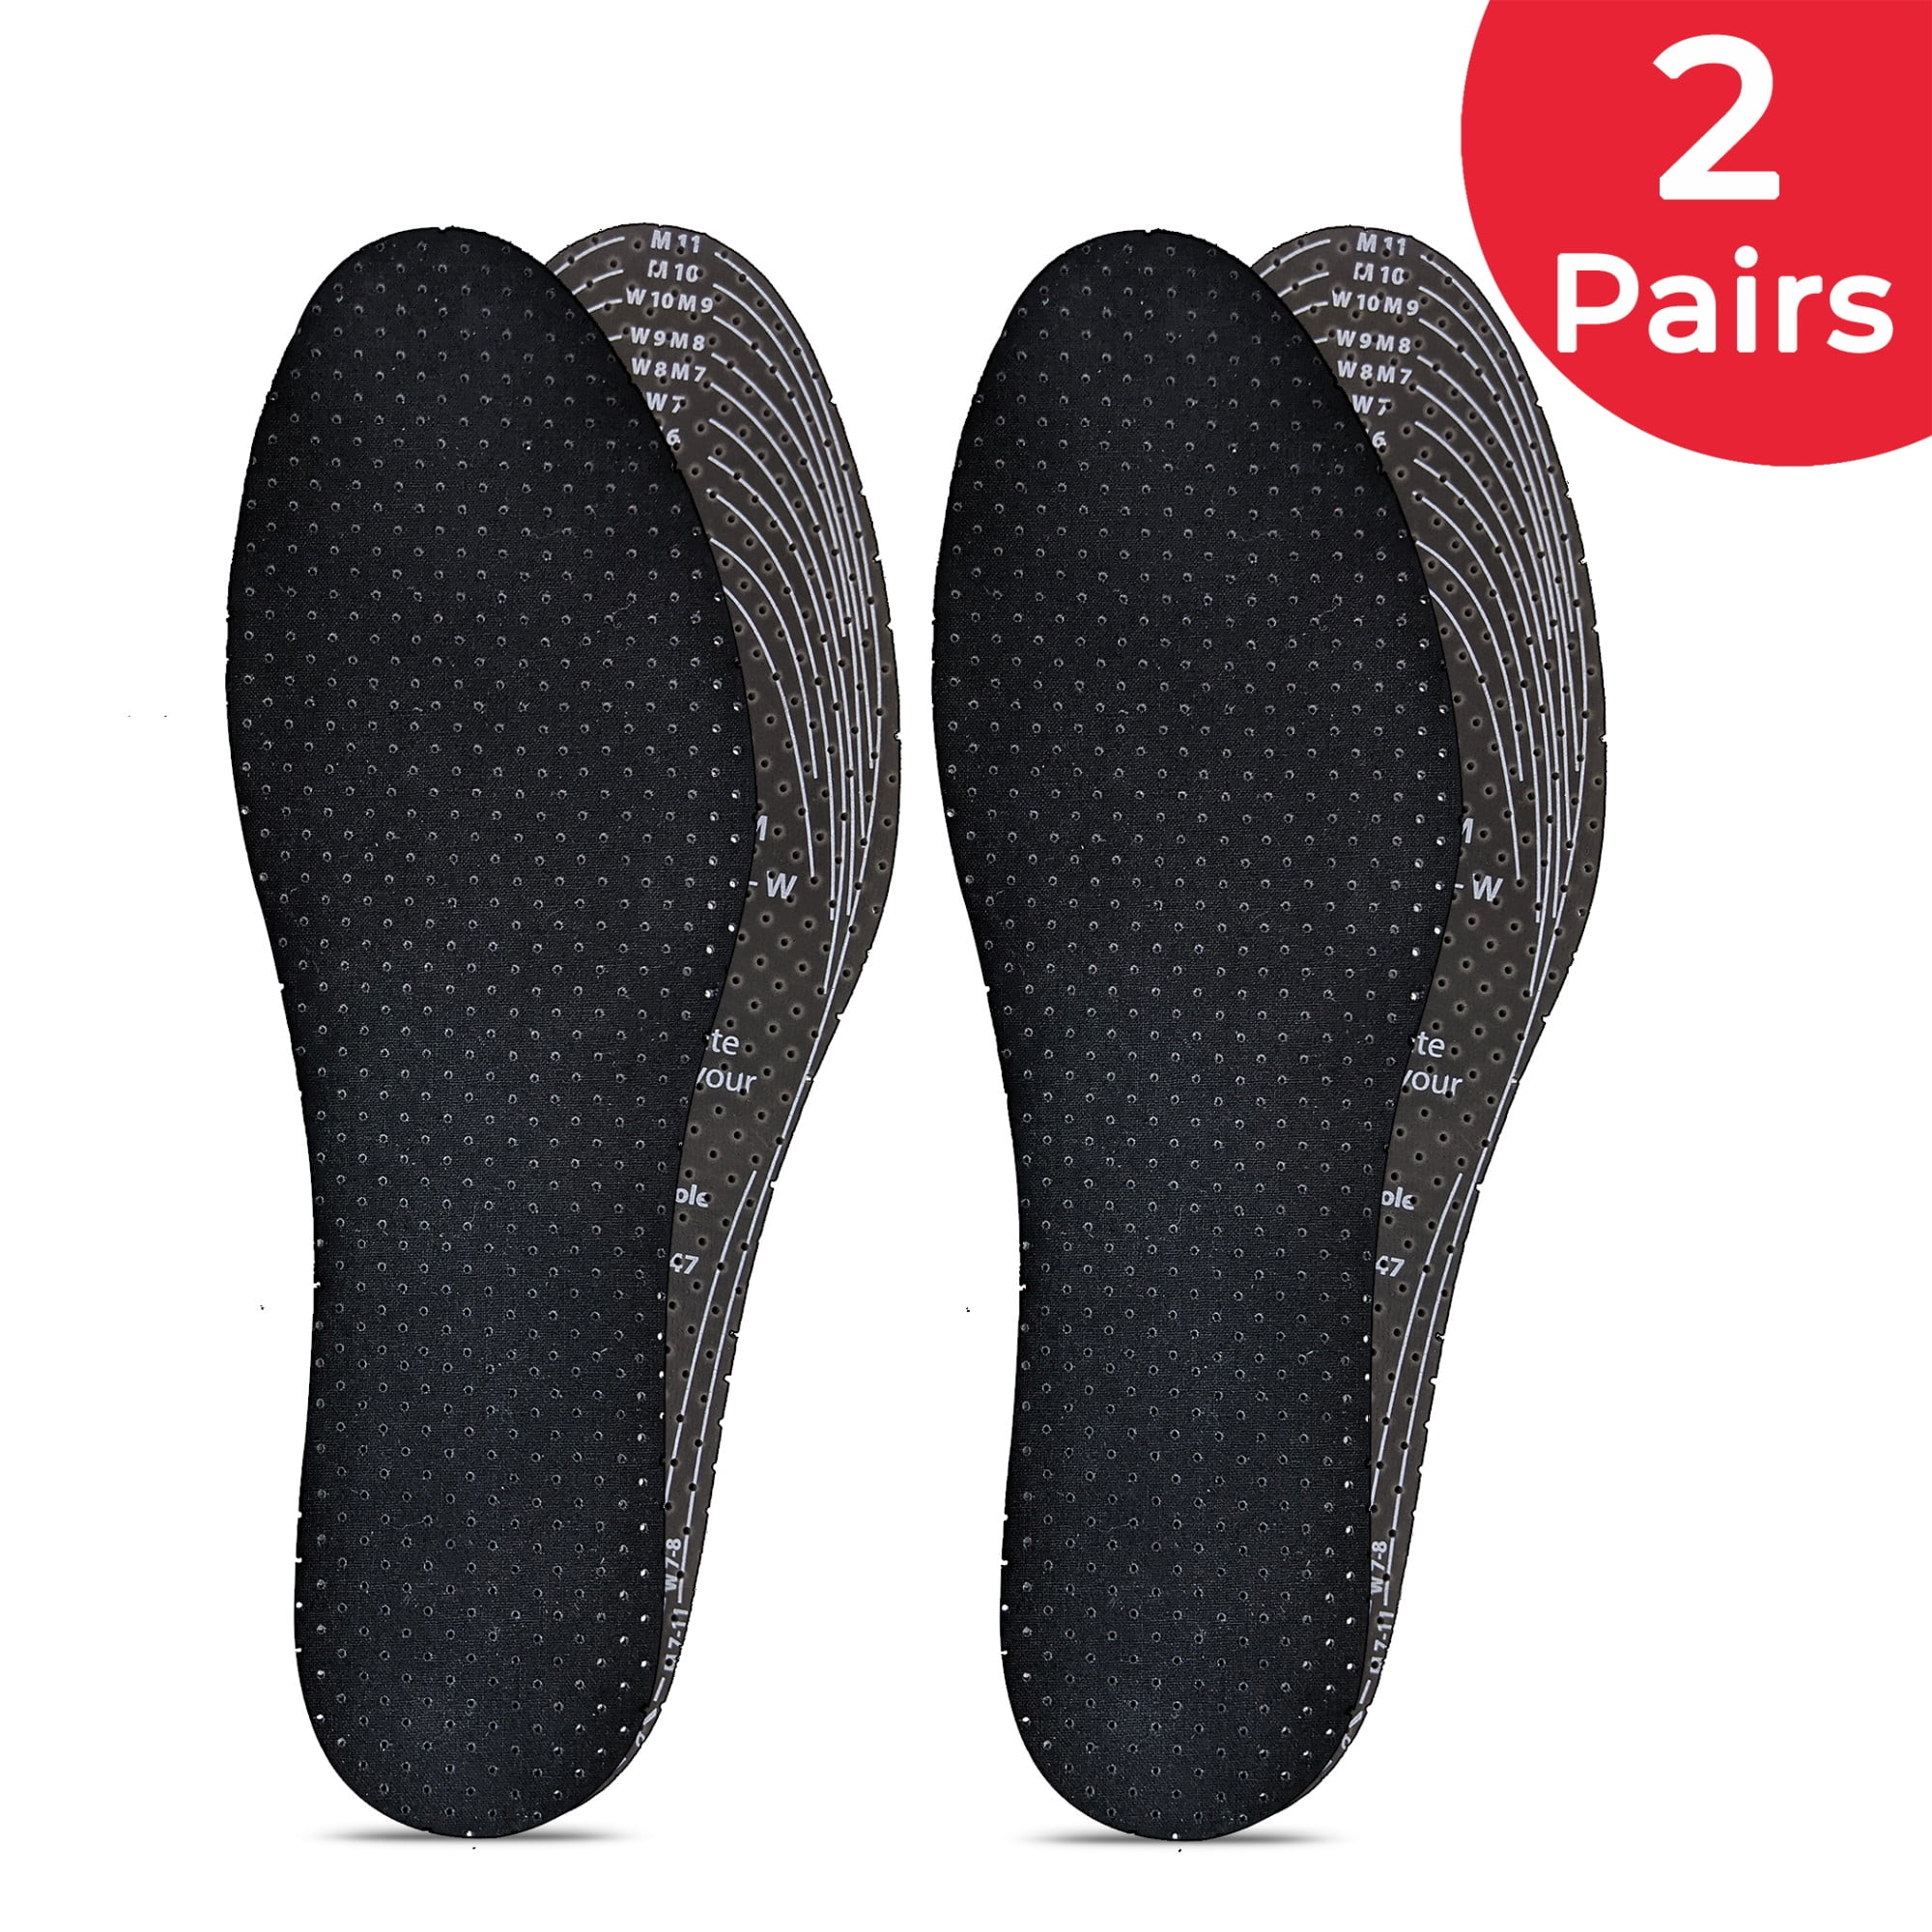 Scalable Insoles Bamboo Charcoal Deodorant Cushion Foot Shoe s Pads Inserts I7V1